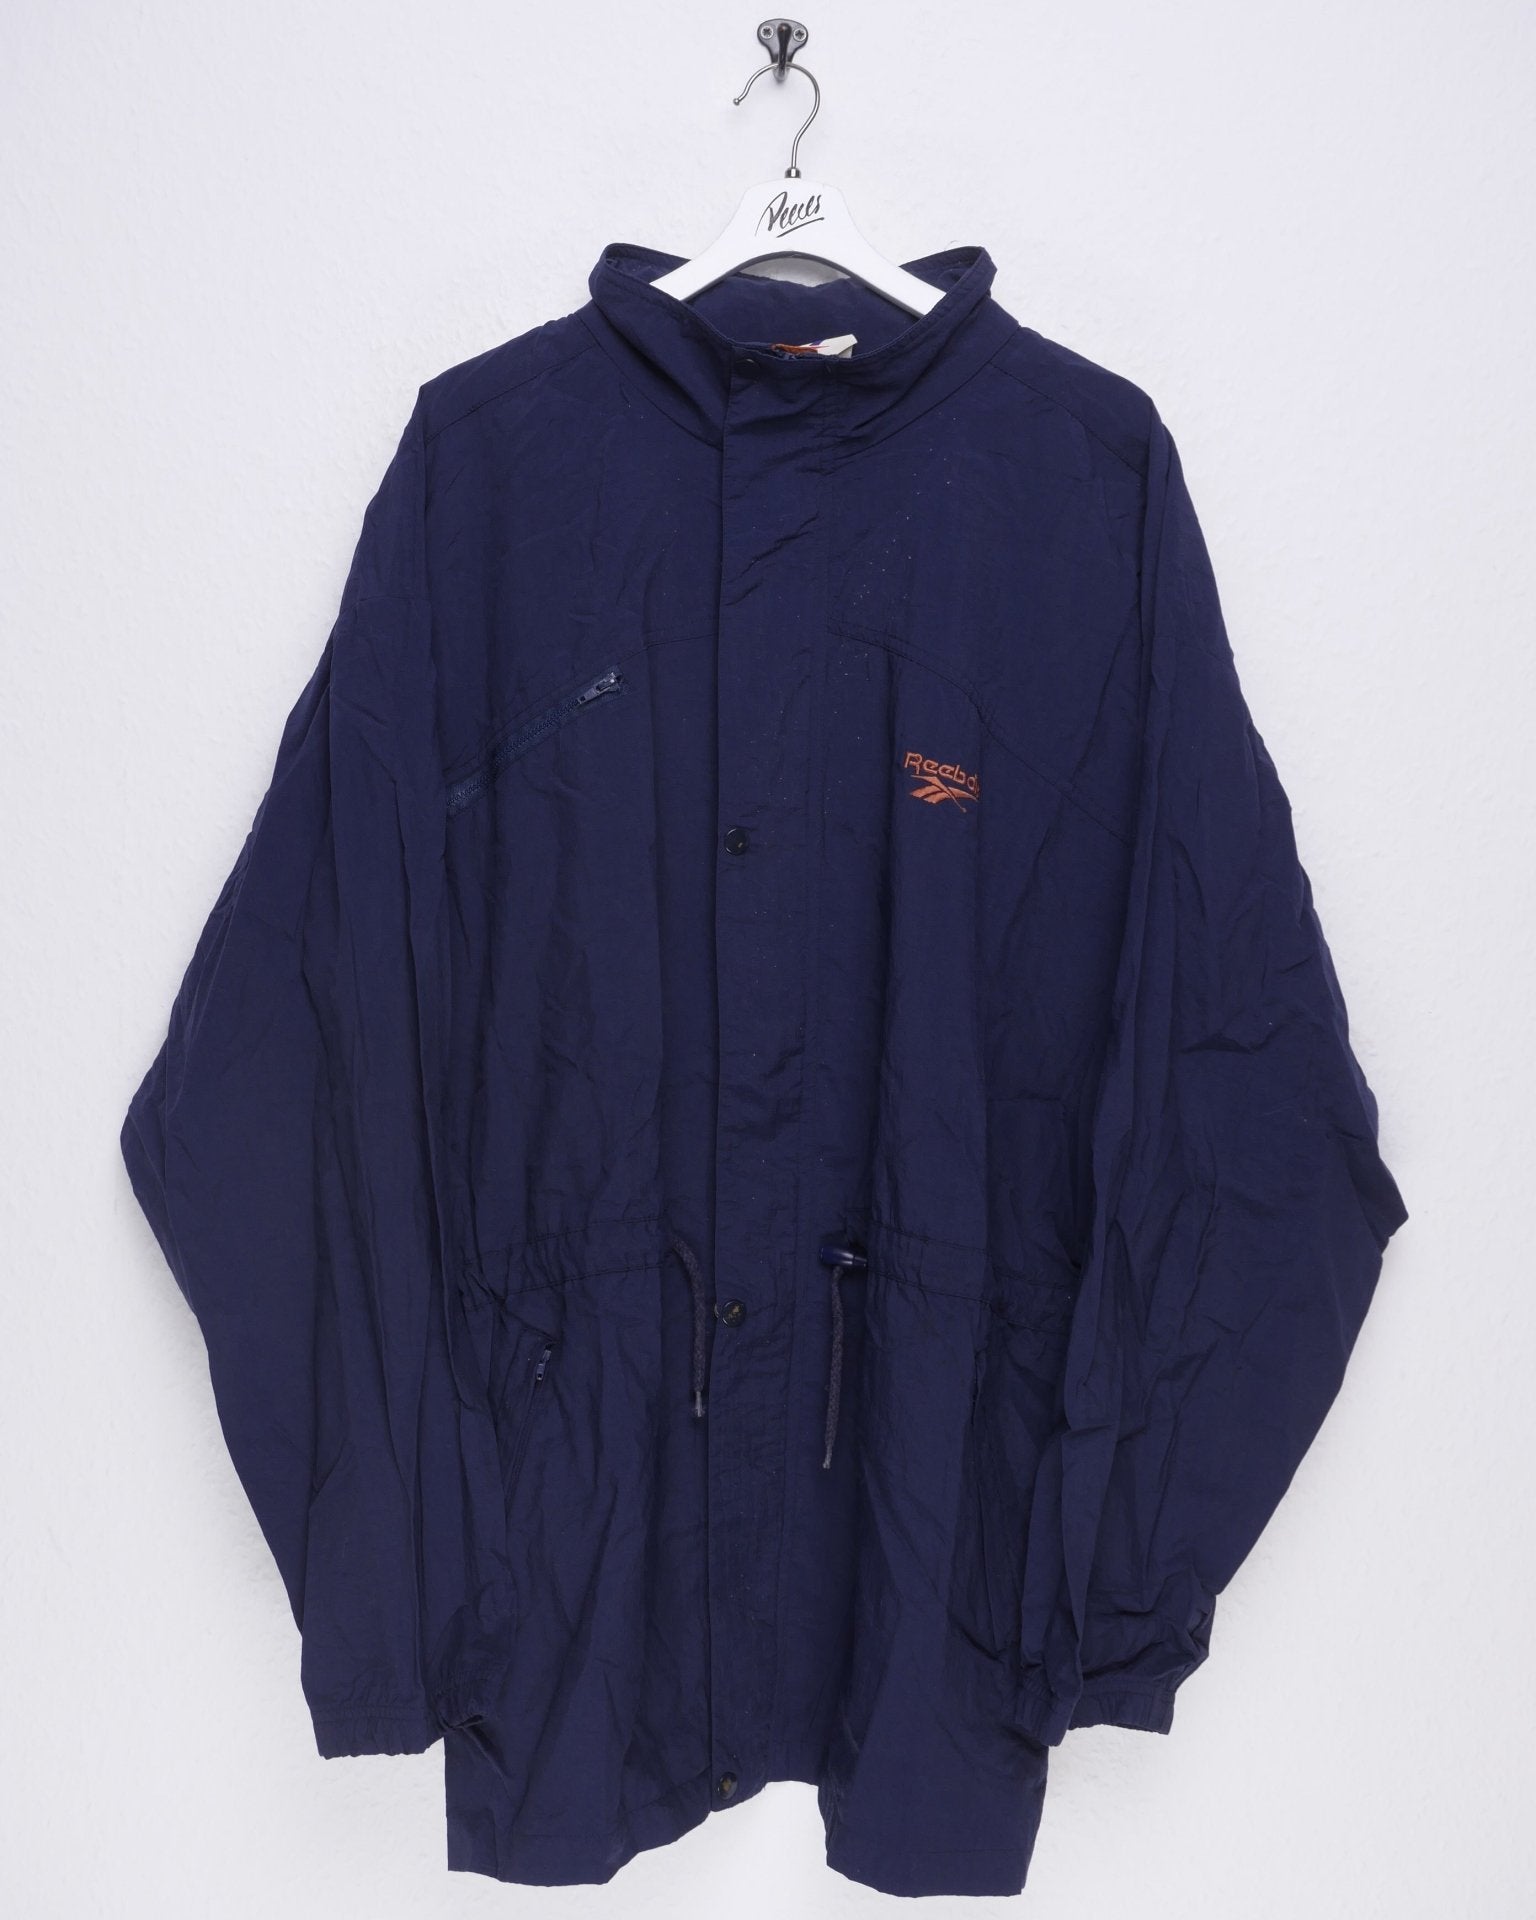 Reebok embroidered Spellout blue Jacke - Peeces